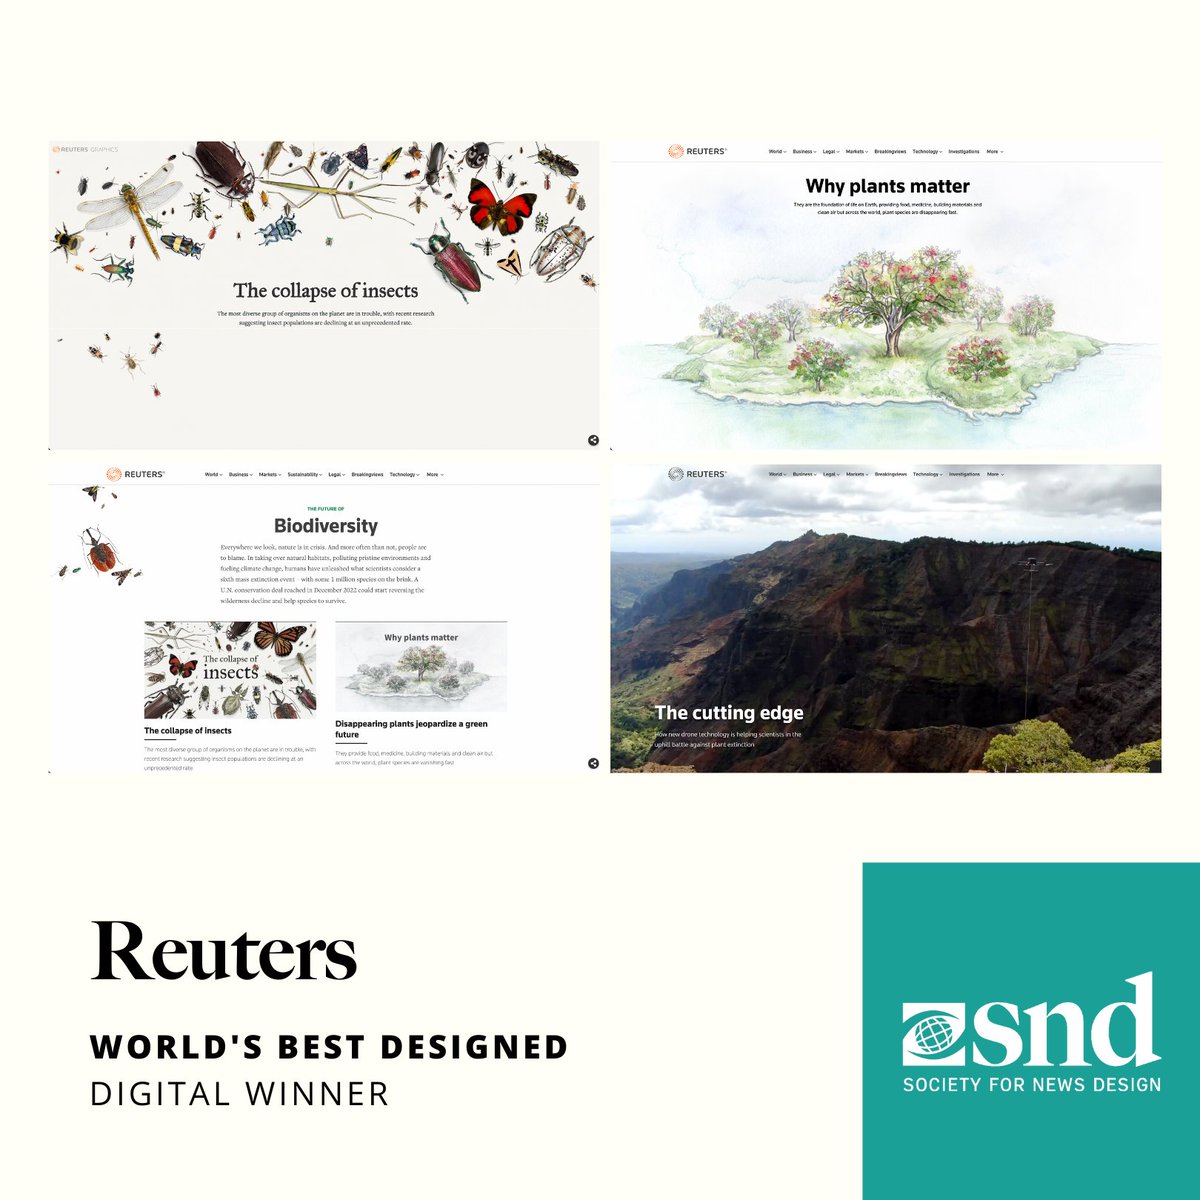 Better late than never. Big congrats to @ReutersGraphics for the @snd #snd44 major wins with the #biodiversity series. Feels surreal to be part of the team creating this awesome project. Looking forward to more collaborations. reuters.com/graphics/GLOBA…